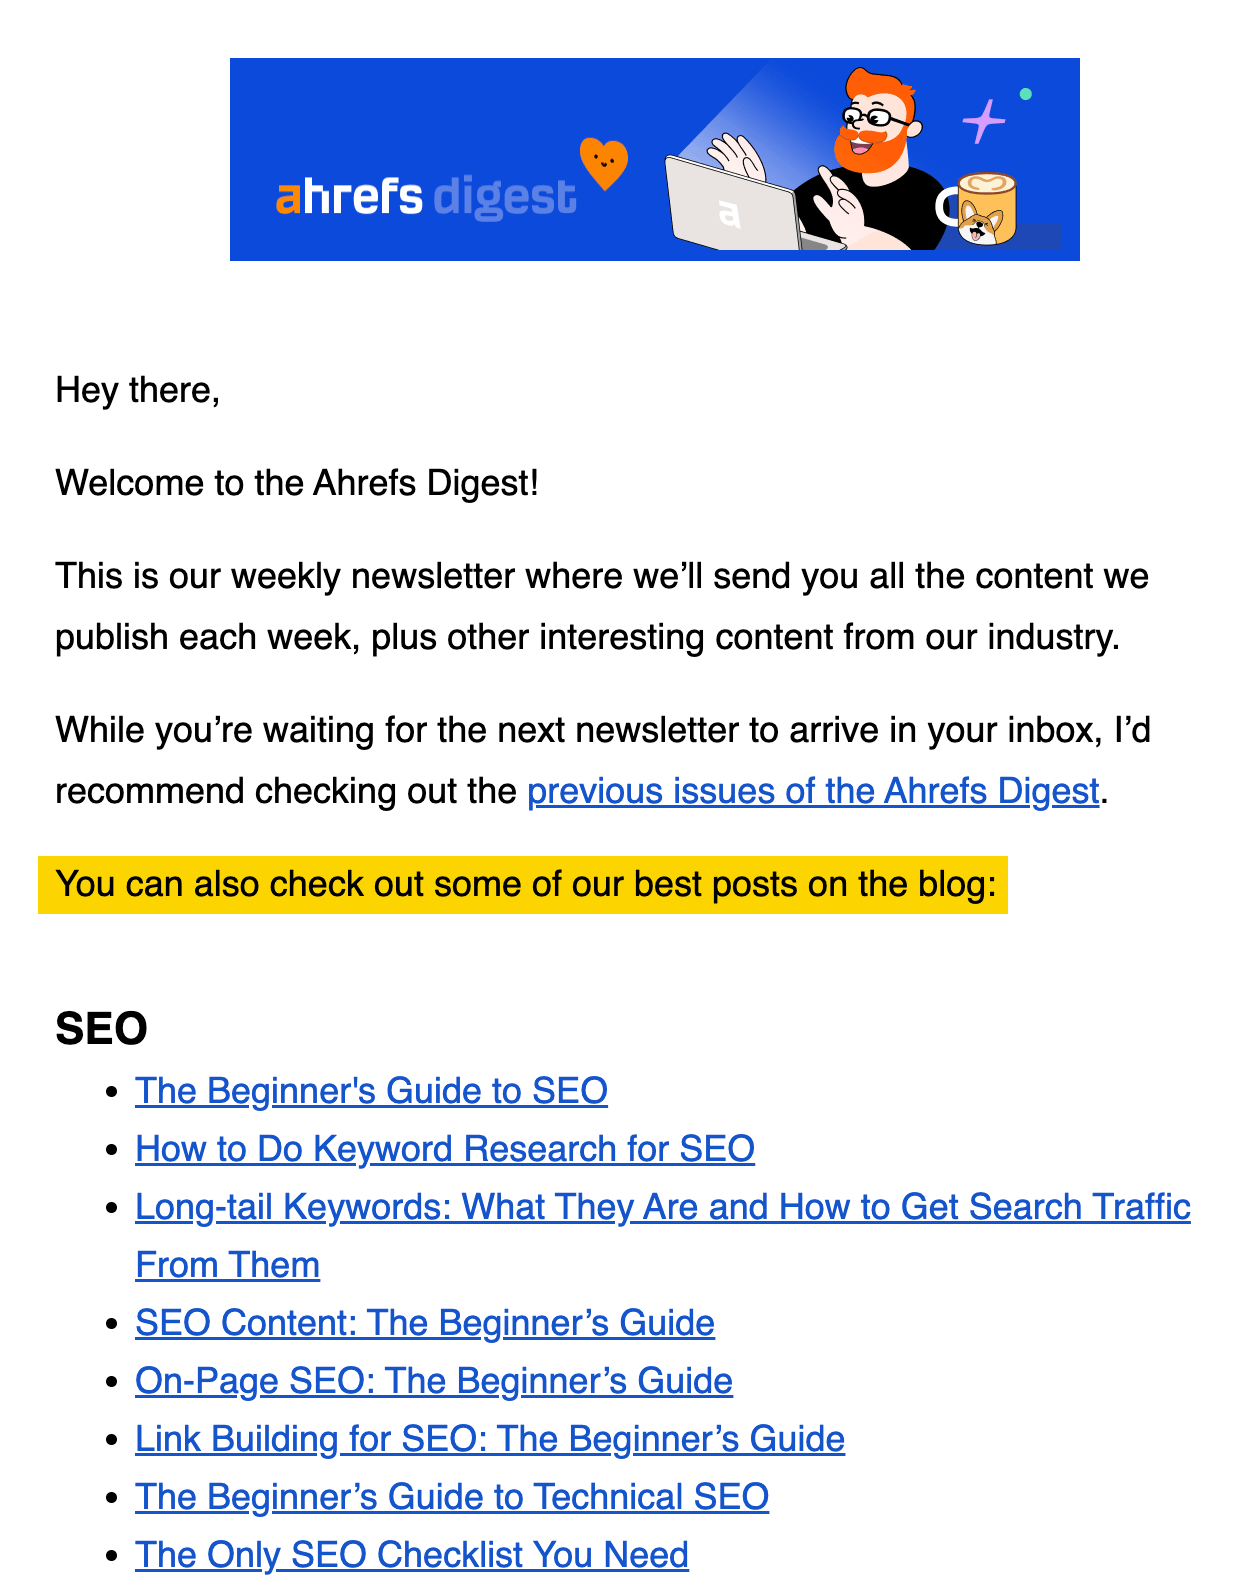 The "welcome" email for the Ahrefs Digest
